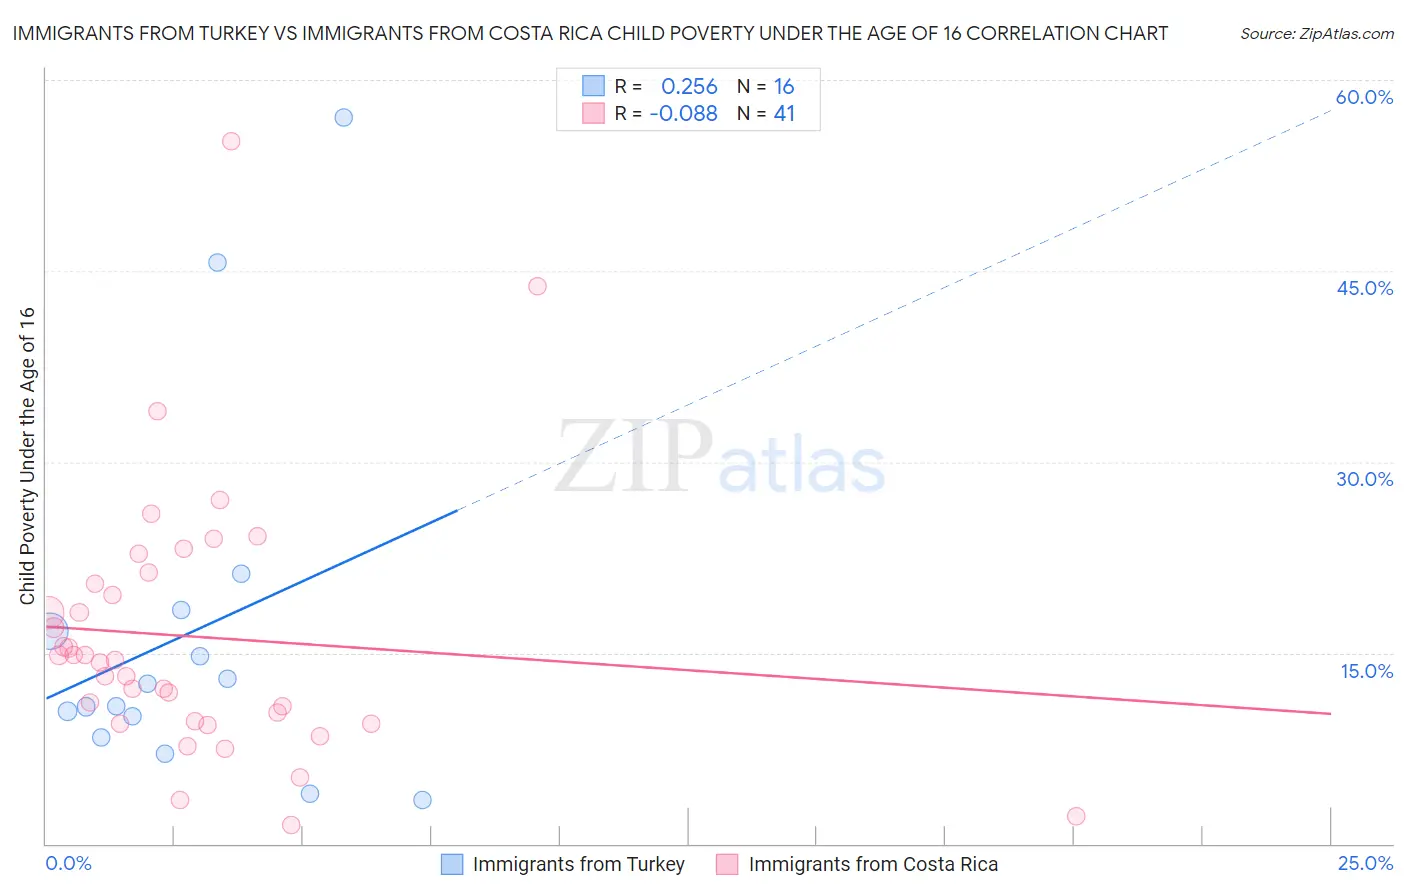 Immigrants from Turkey vs Immigrants from Costa Rica Child Poverty Under the Age of 16